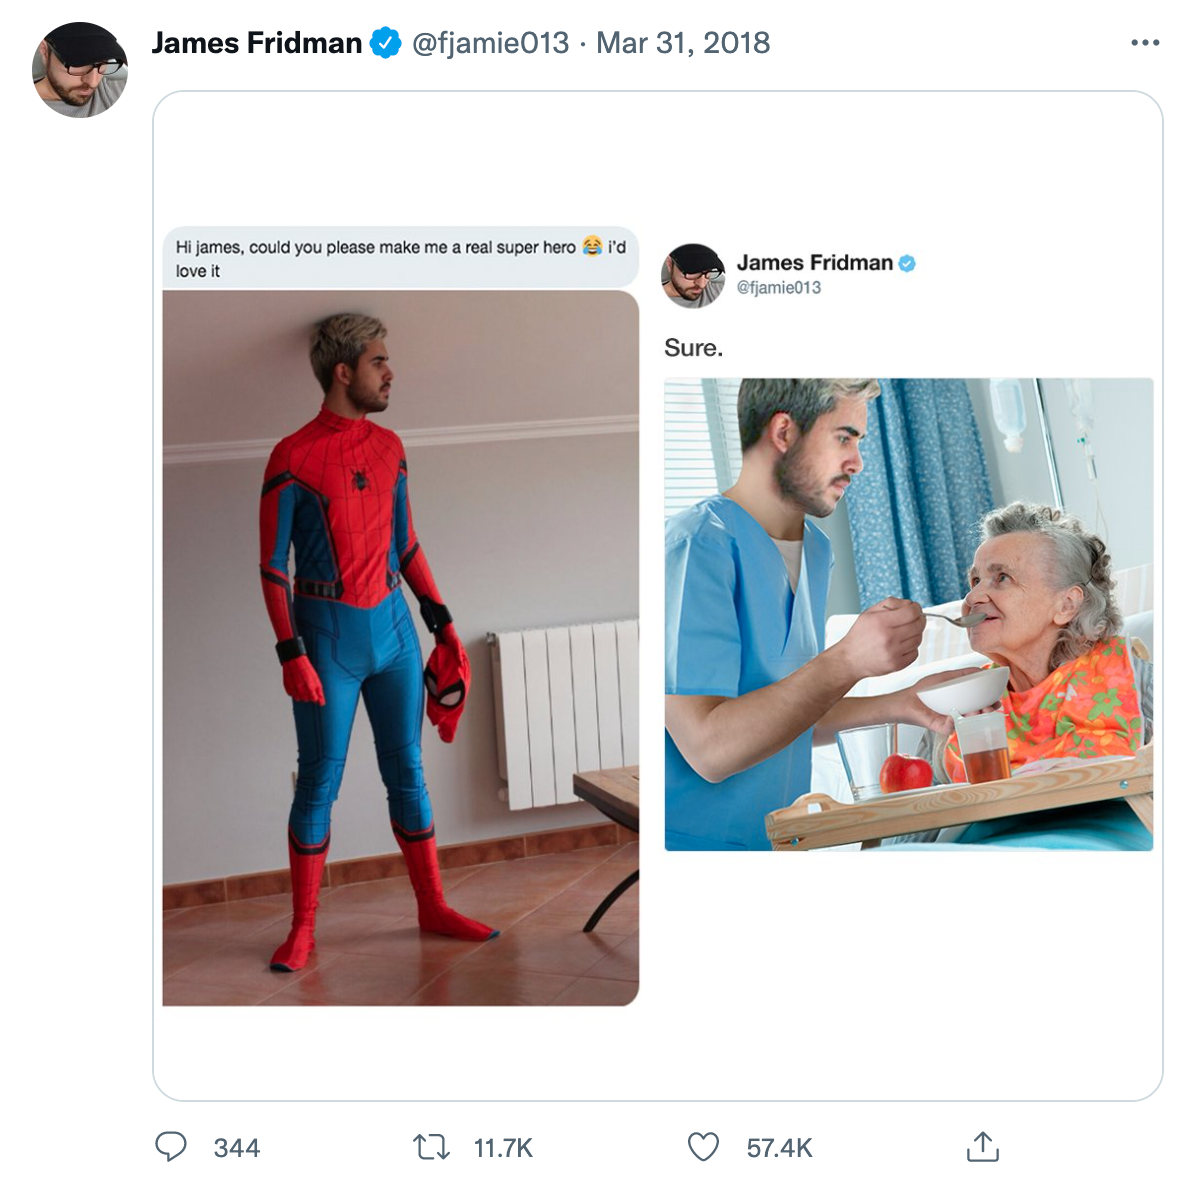 James Fridman is known as "the Photoshop troll" because he edits photos for people upon request, but never how they expected. He often takes their request literally making hilariously impressive edits to their photos. He also frequently offers words of encouragement and support when someone is requesting to "fix themselves".

<br/><br/>

We all wish we could change some things about ourselves, yet ironically enough even Photoshop can't always fix us. Enjoy these wholesome pics from James Fridman that prove not all moments need to be changed.

<br/><br/>


A true act of service :)